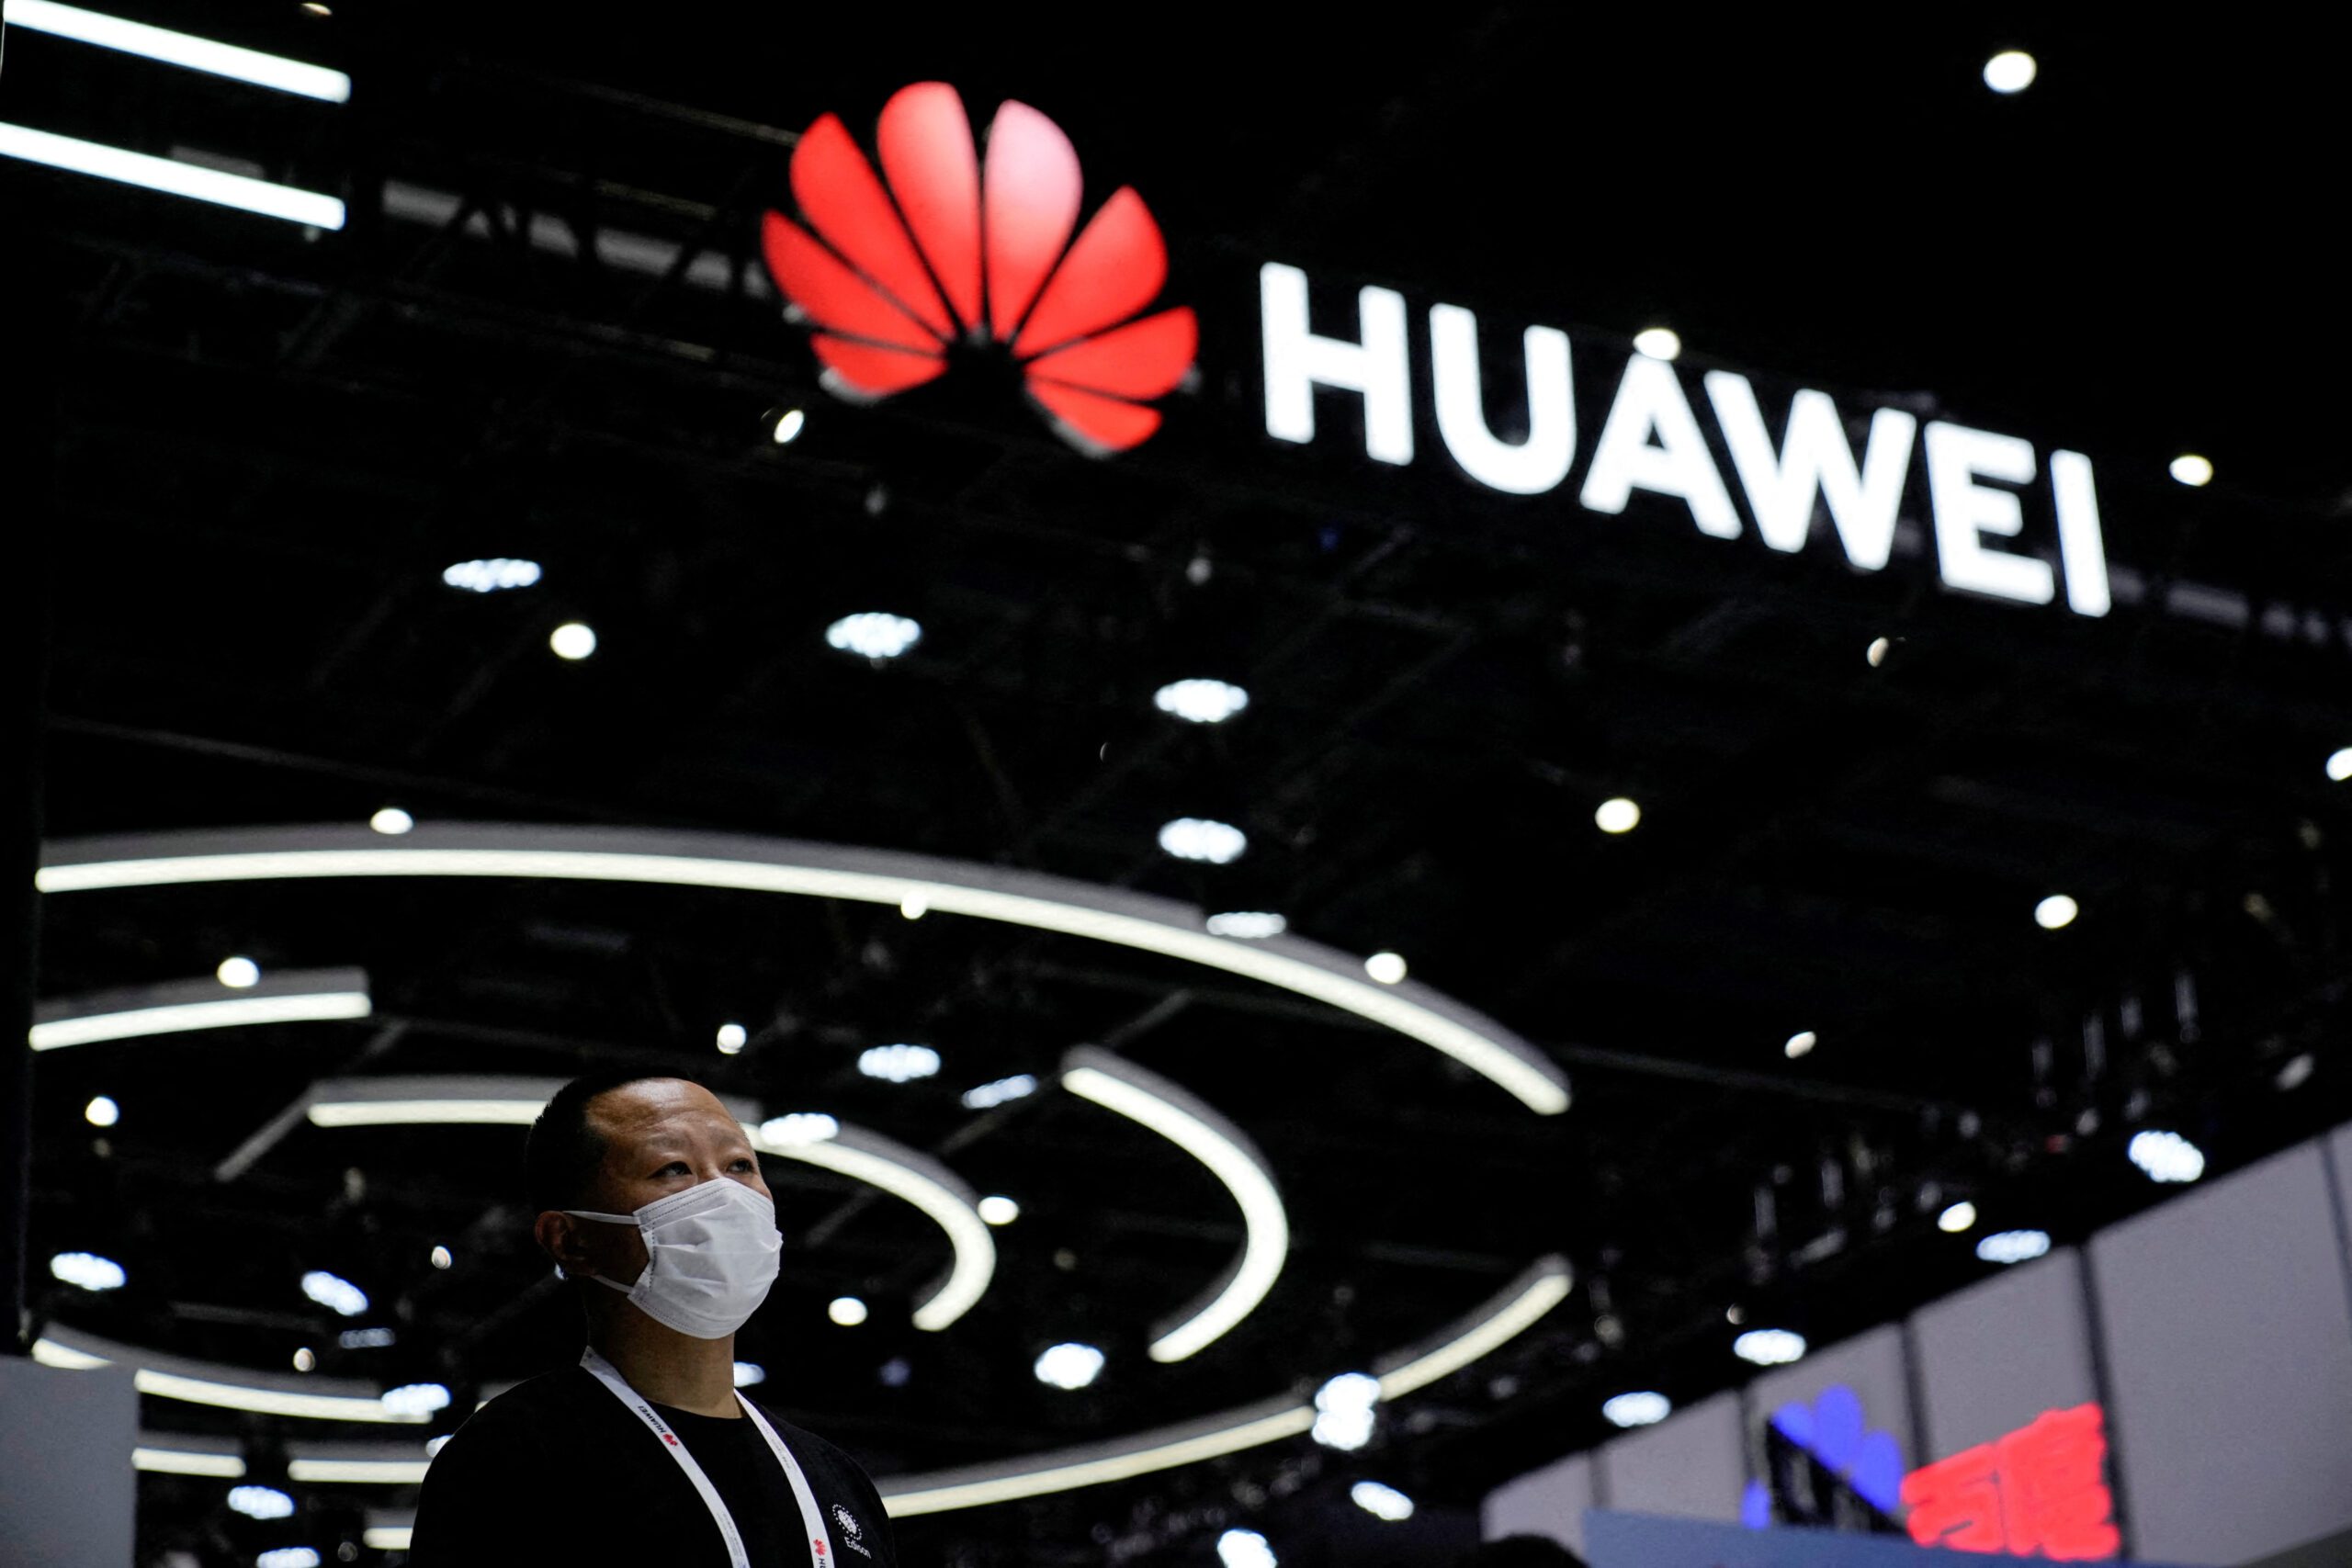 Seagate to pay $300M penalty for shipping Huawei 7 million hard drives